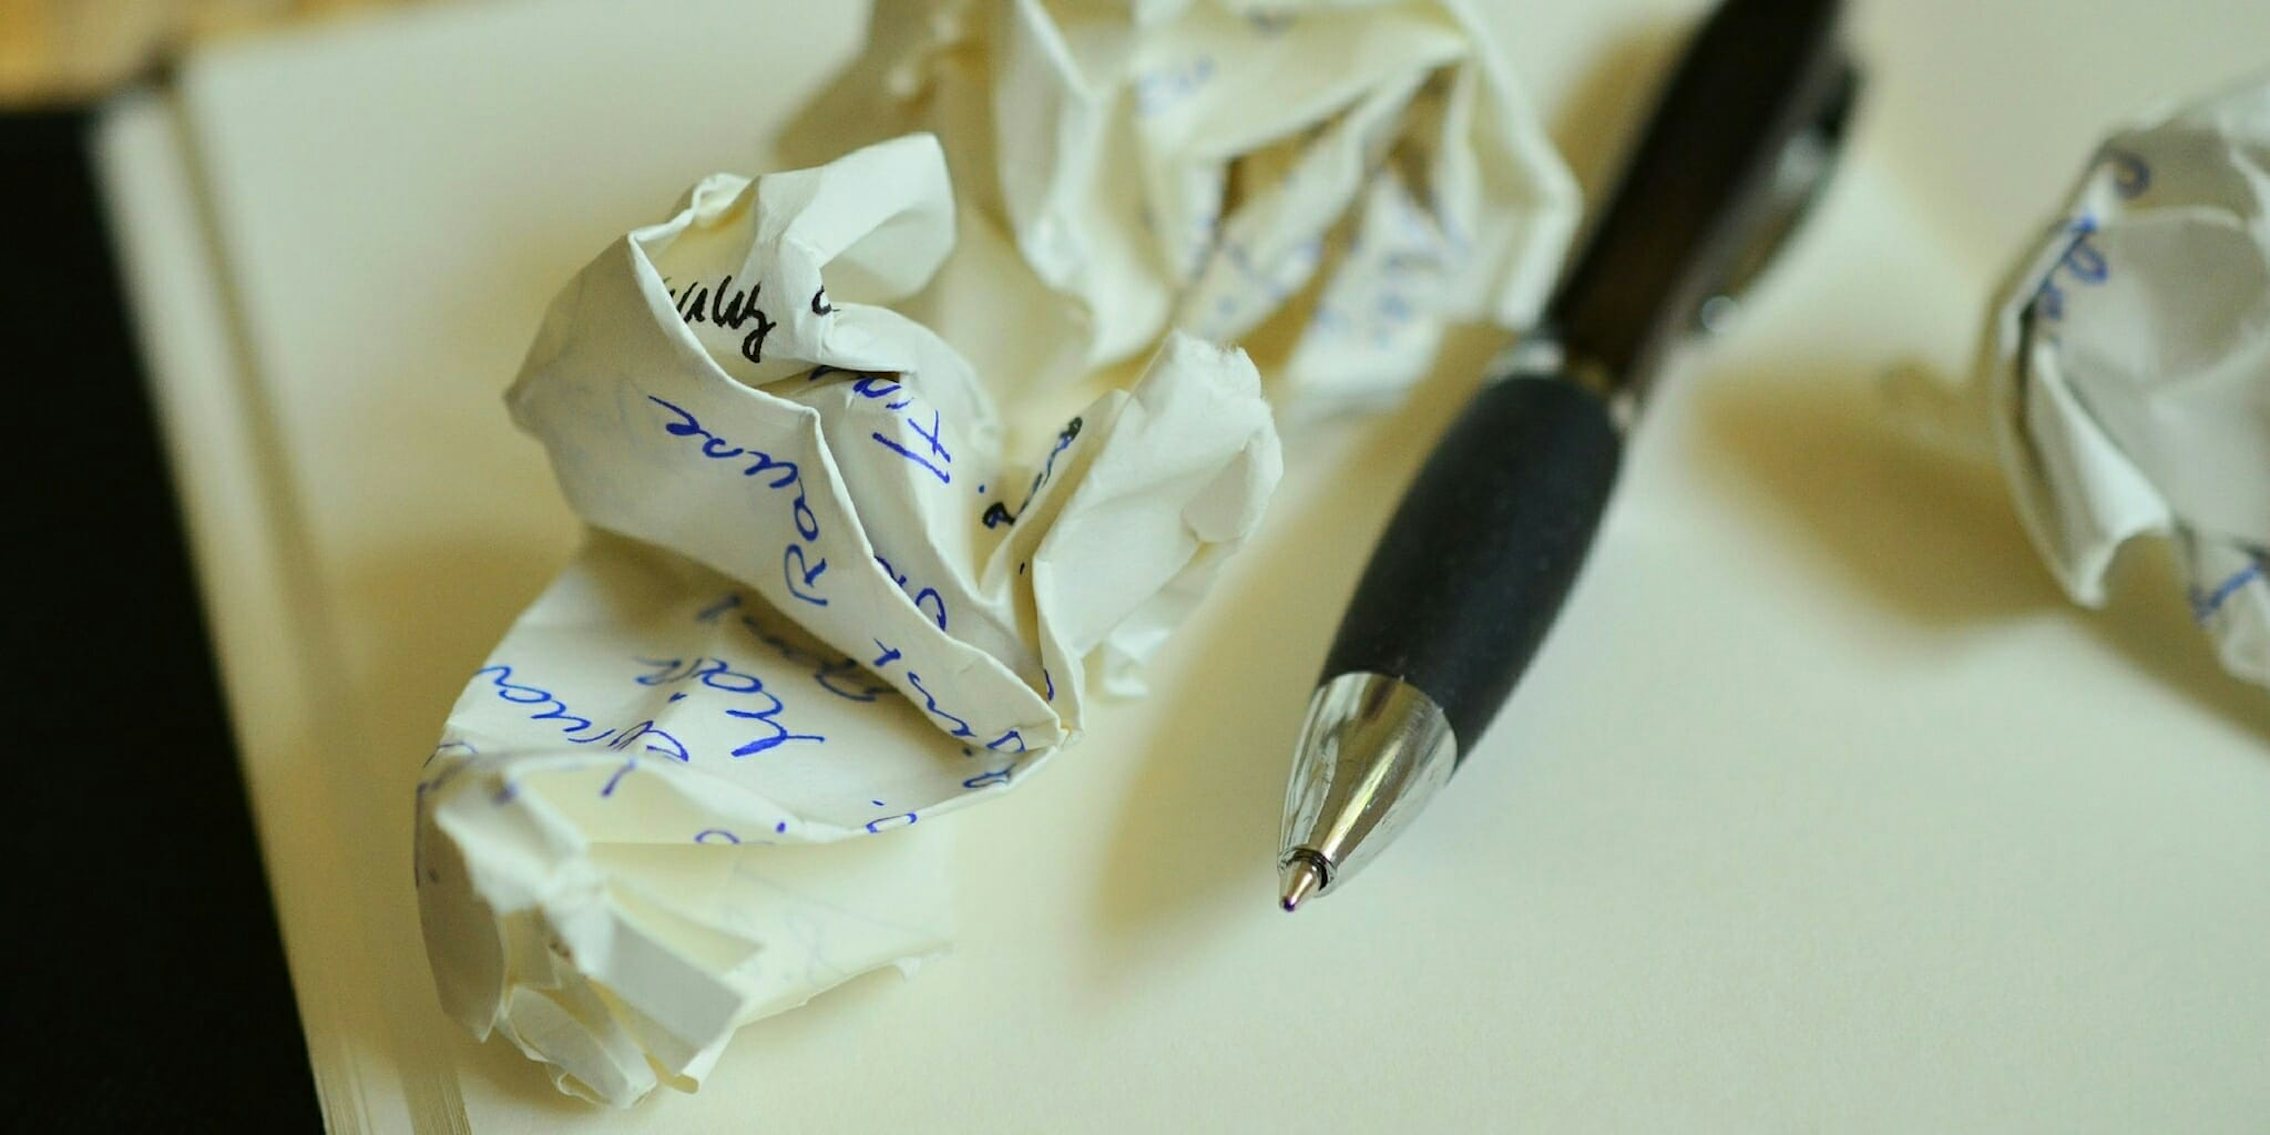 Crumpled up paper while writing letters.